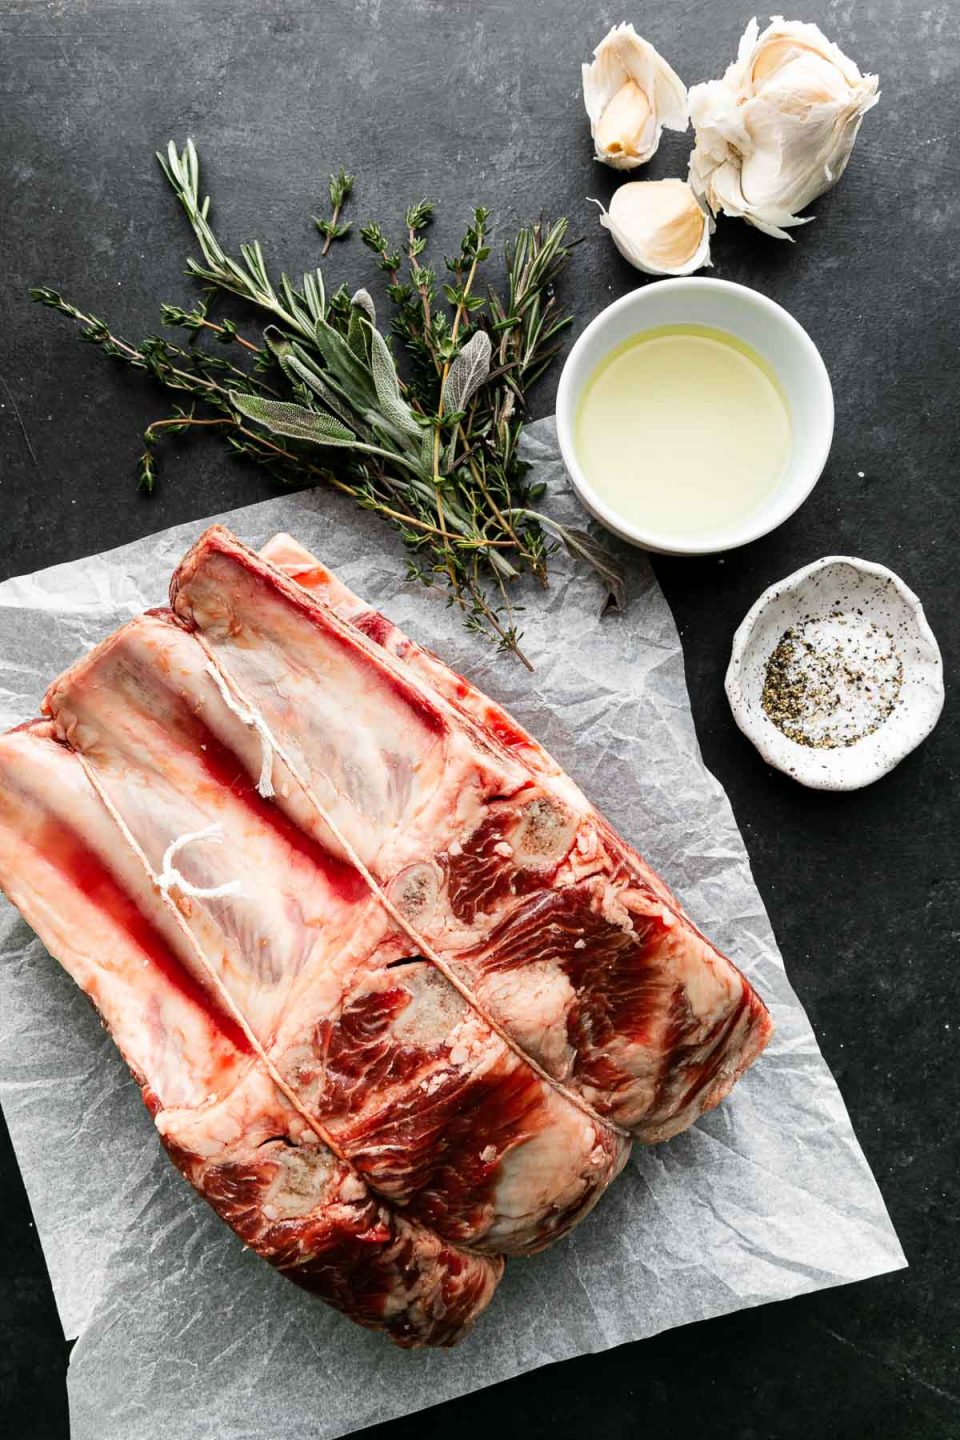 Garlic Herb Crusted Prime Rib ingredients arranged on a dark textured surface: bone-in standing beef rib roast that sits on a sheet of crinkled wax paper, avocado oil, garlic, fresh rosemary, fresh thyme, kosher salt, and ground black pepper.